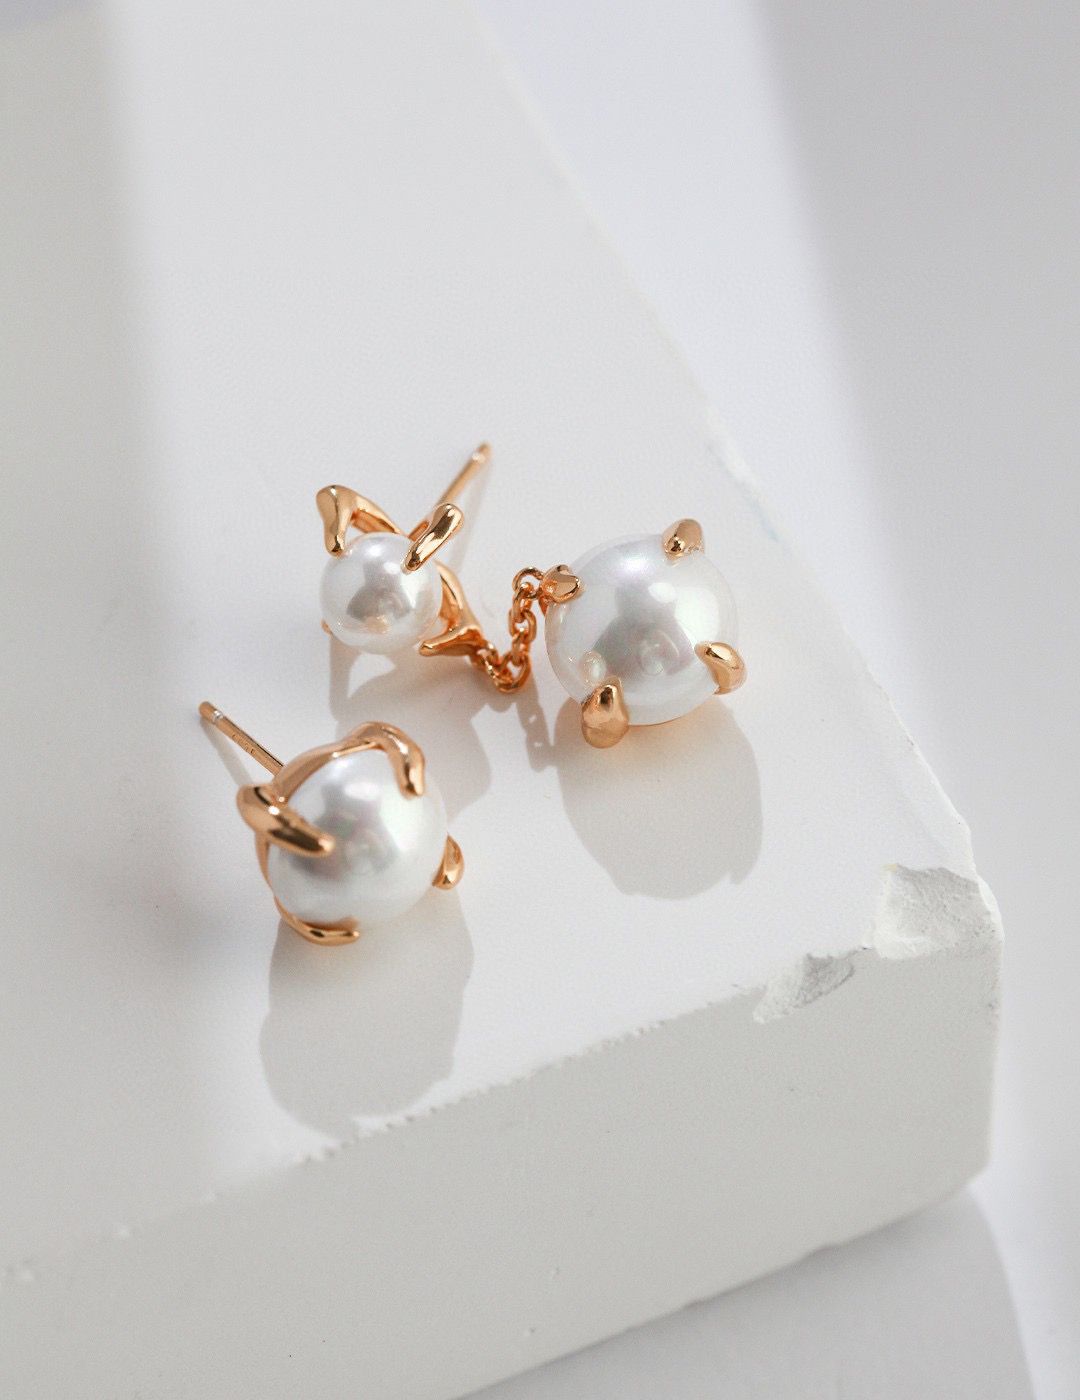 Close-up of Pure Pearl Elegance handcrafted pearl earrings, featuring lustrous white pearls set in a sterling silver or gold-plated backing. The earrings have a classic design and embody timeless elegance, making them a versatile accessory for any occasion.